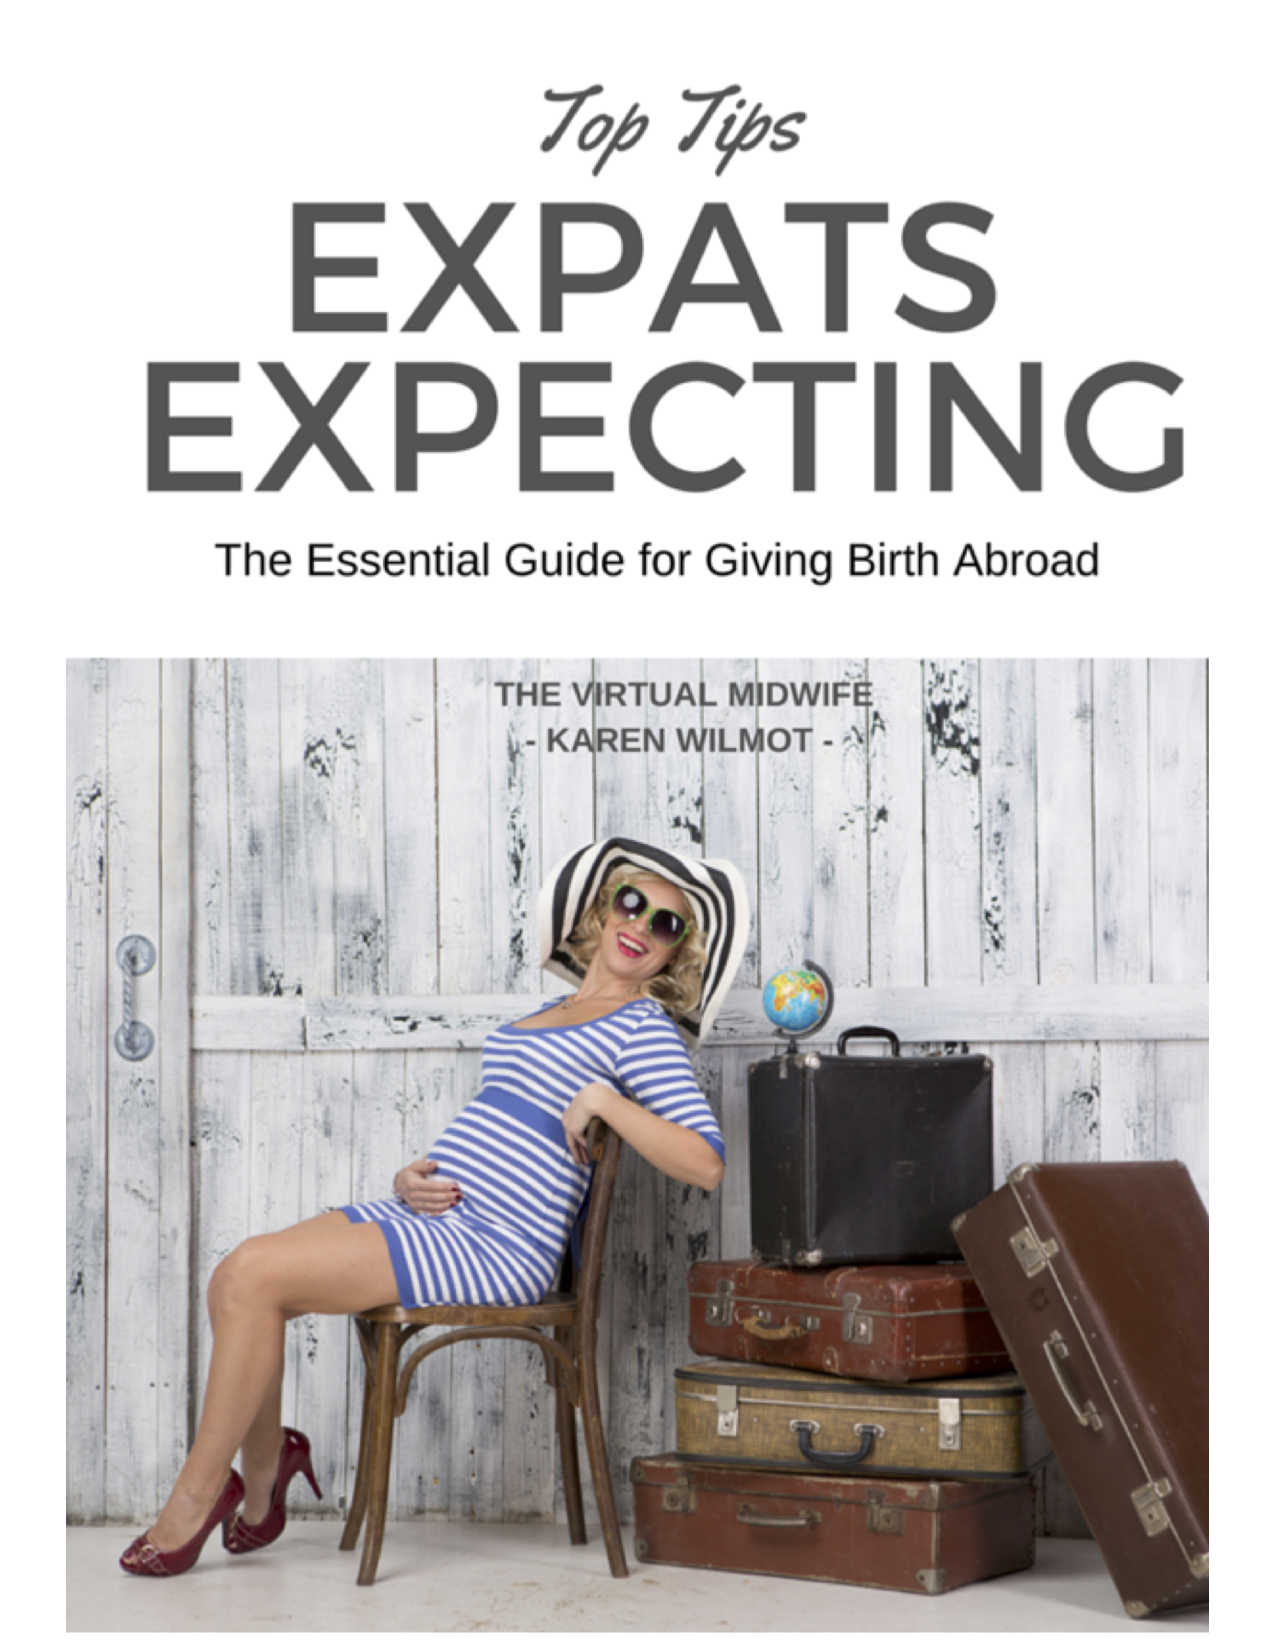 Top Tips for Expats Expecting copy 2